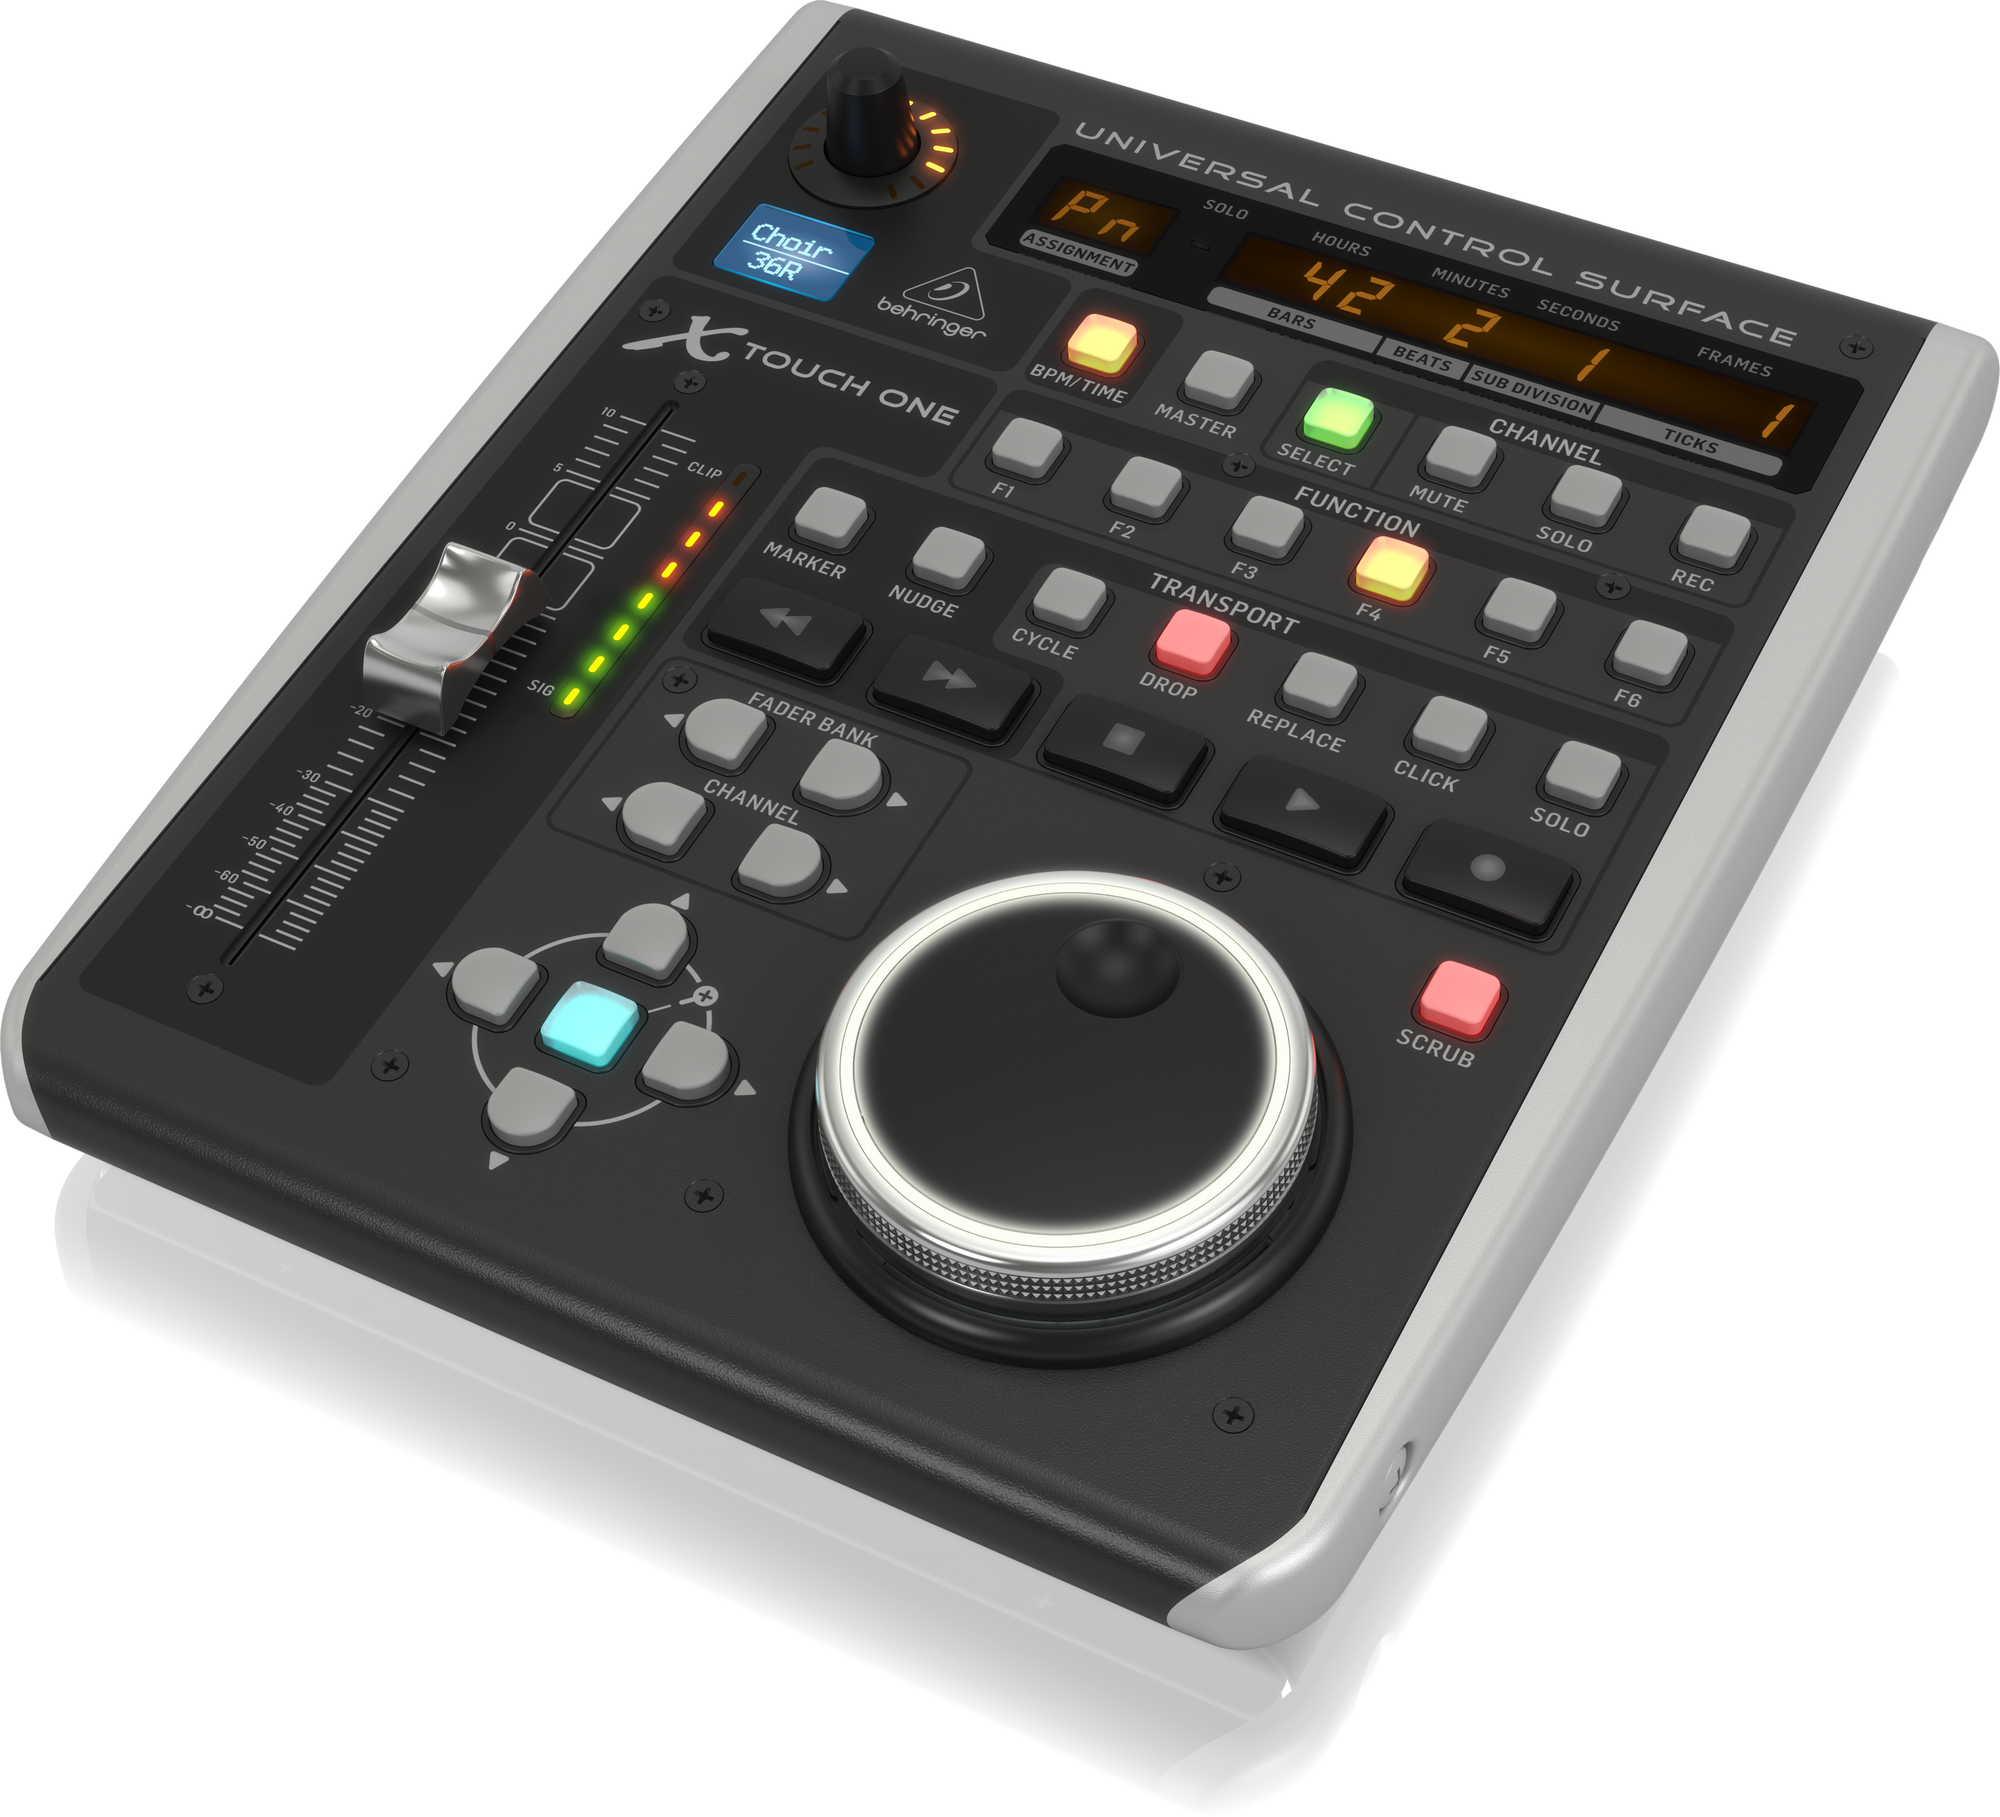 Behringer | Product | X-TOUCH ONE